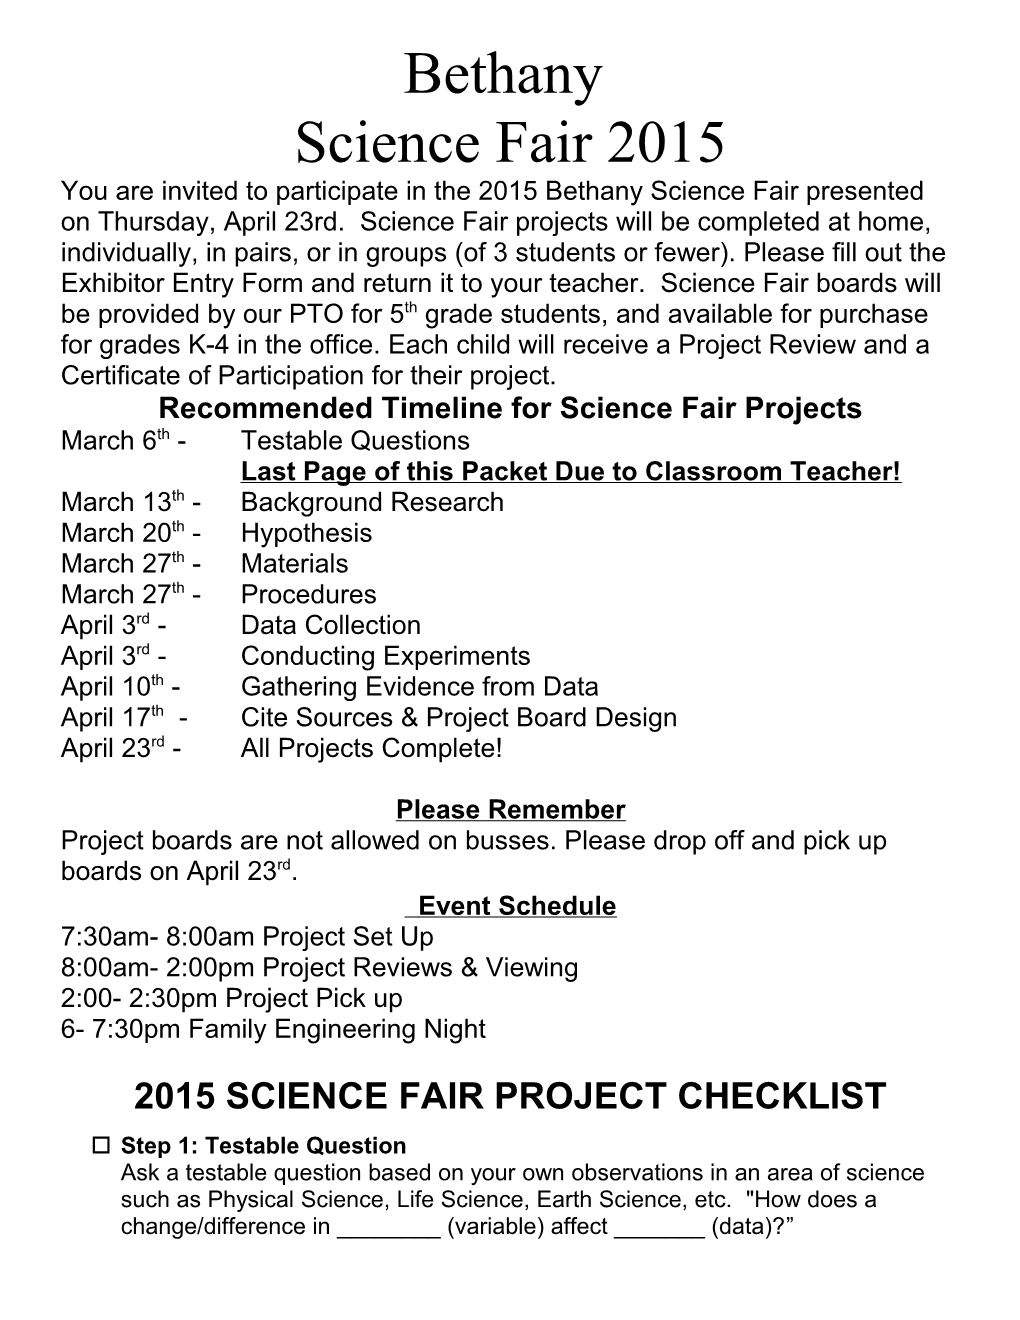 Recommended Timeline for Science Fair Projects